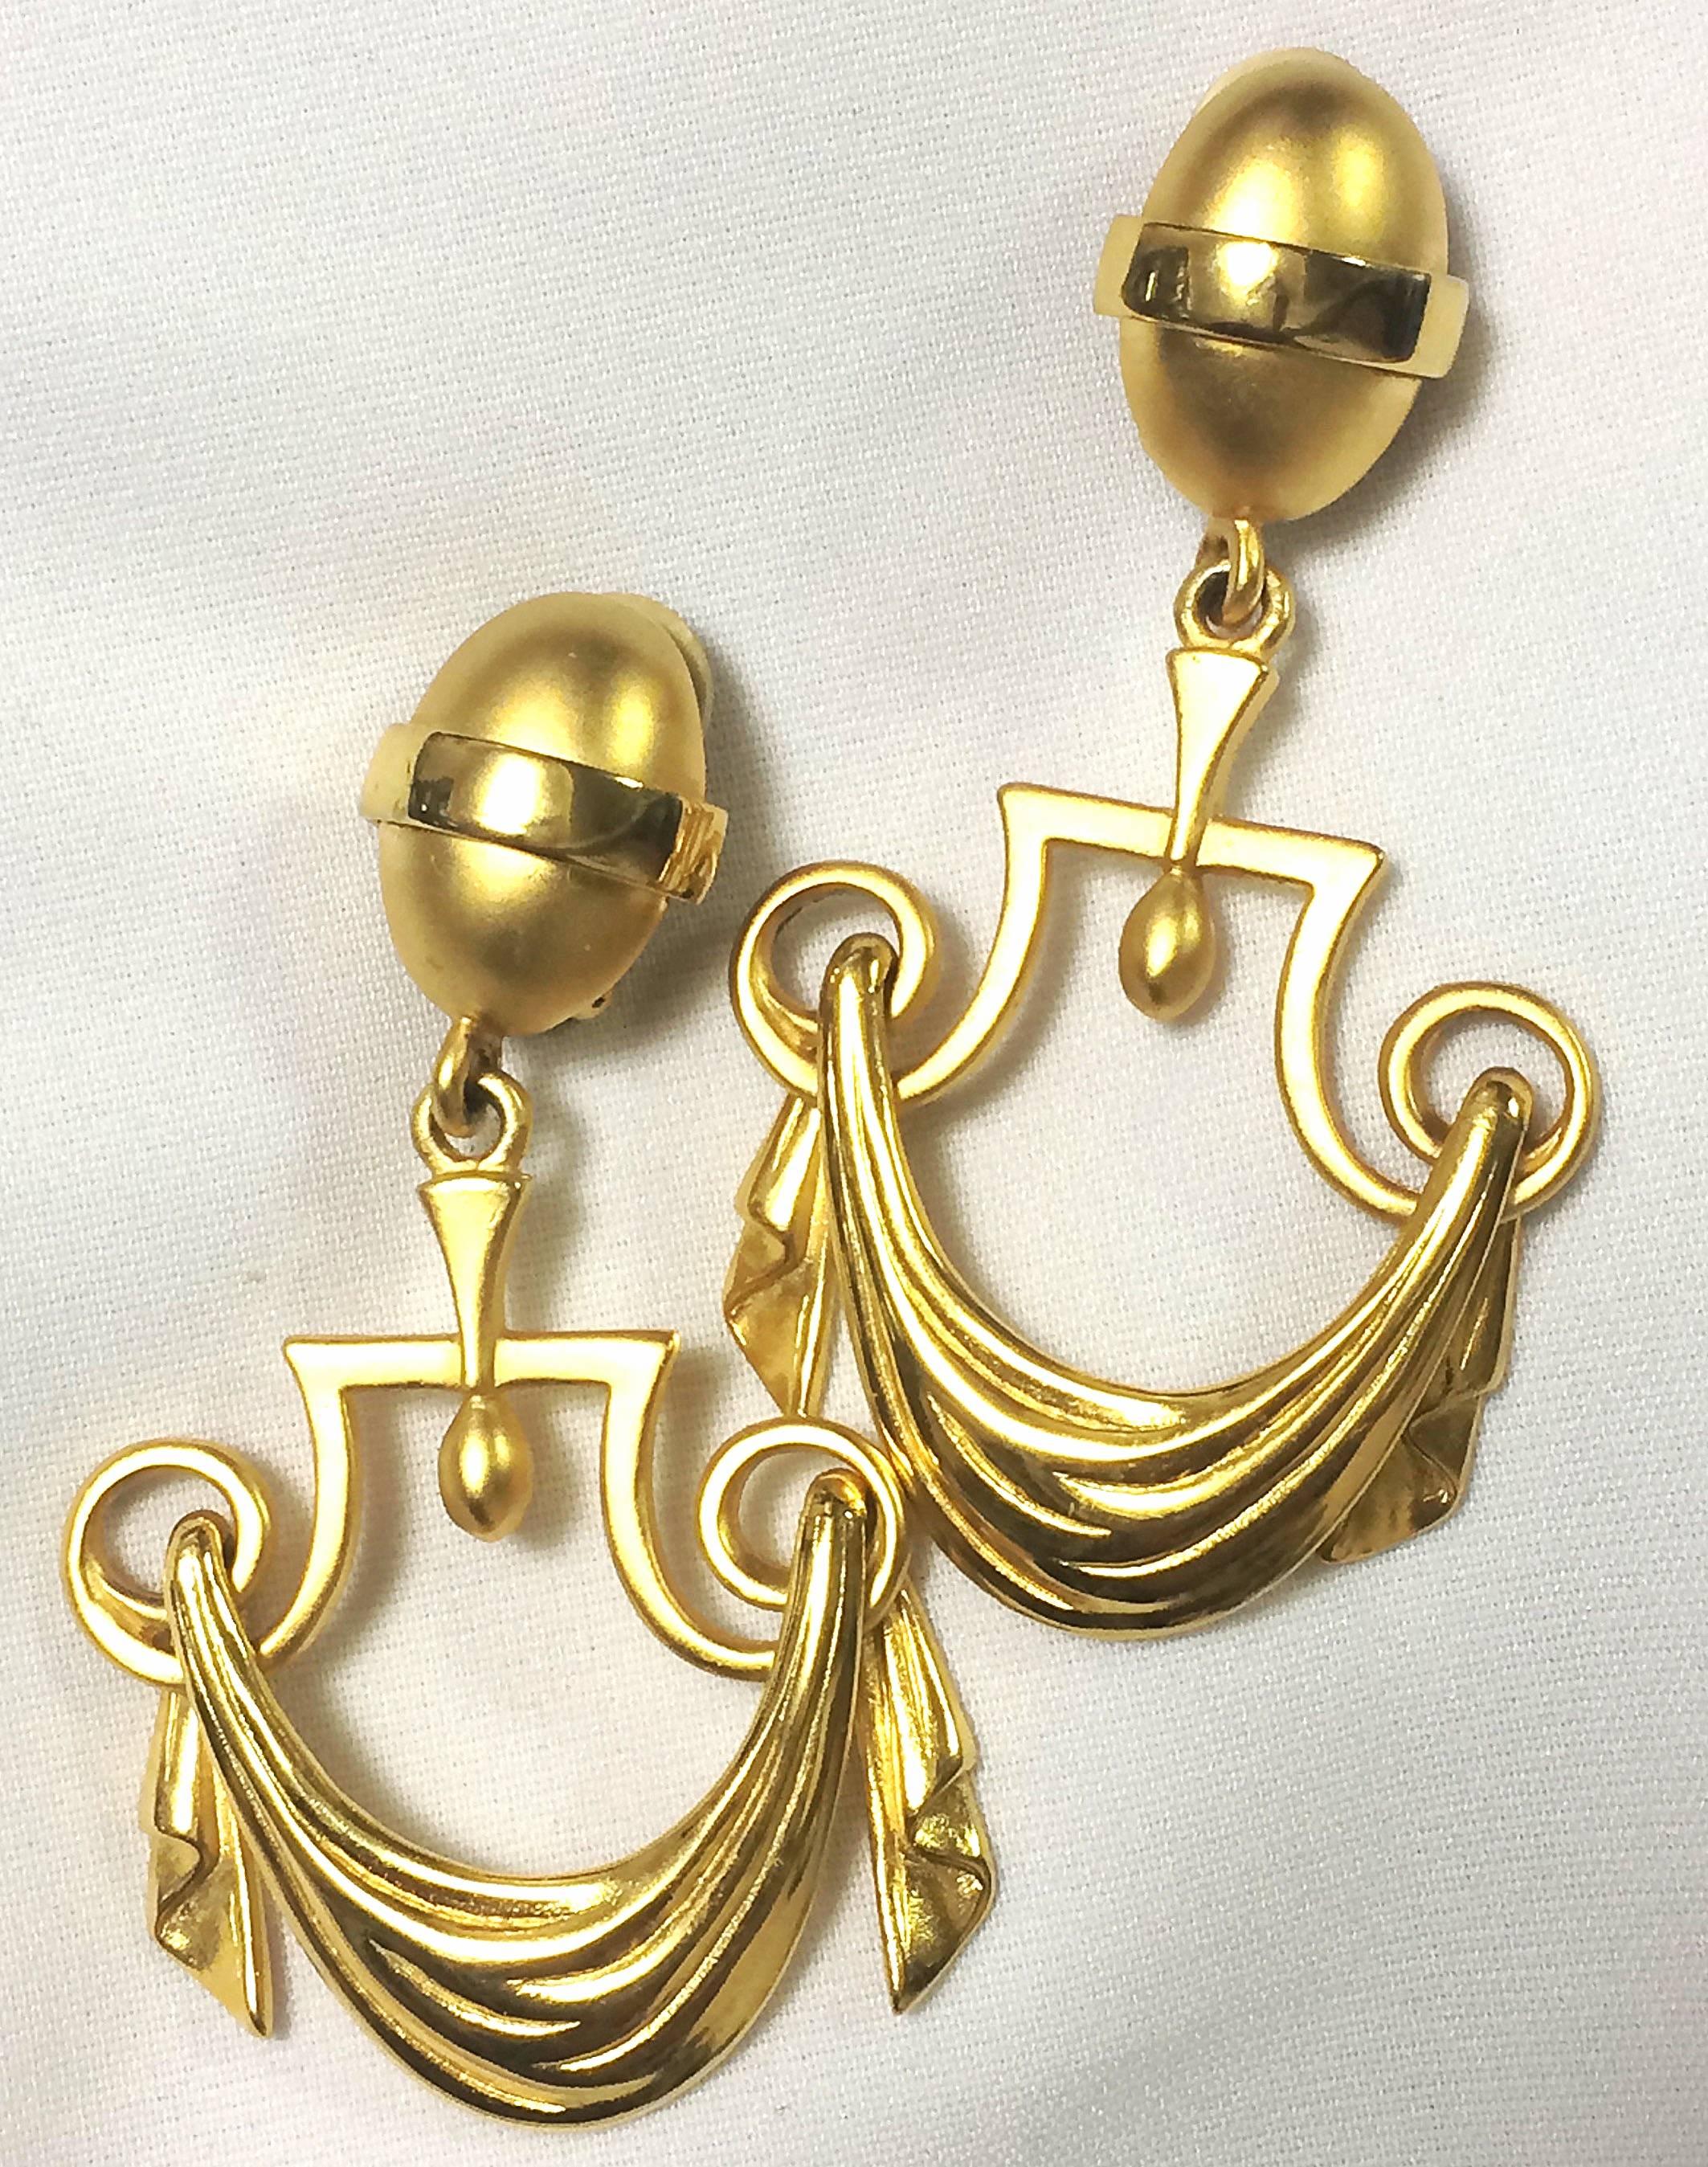 1990s. Vintage Karl Lagerfeld golden dangling earrings in drapery window curtain design. Unique and rare jewelry.

1990s. Vintage Karl Lagerfeld golden dangling earrings in drapery window curtain design. Unique and rare jewelry.
Introducing